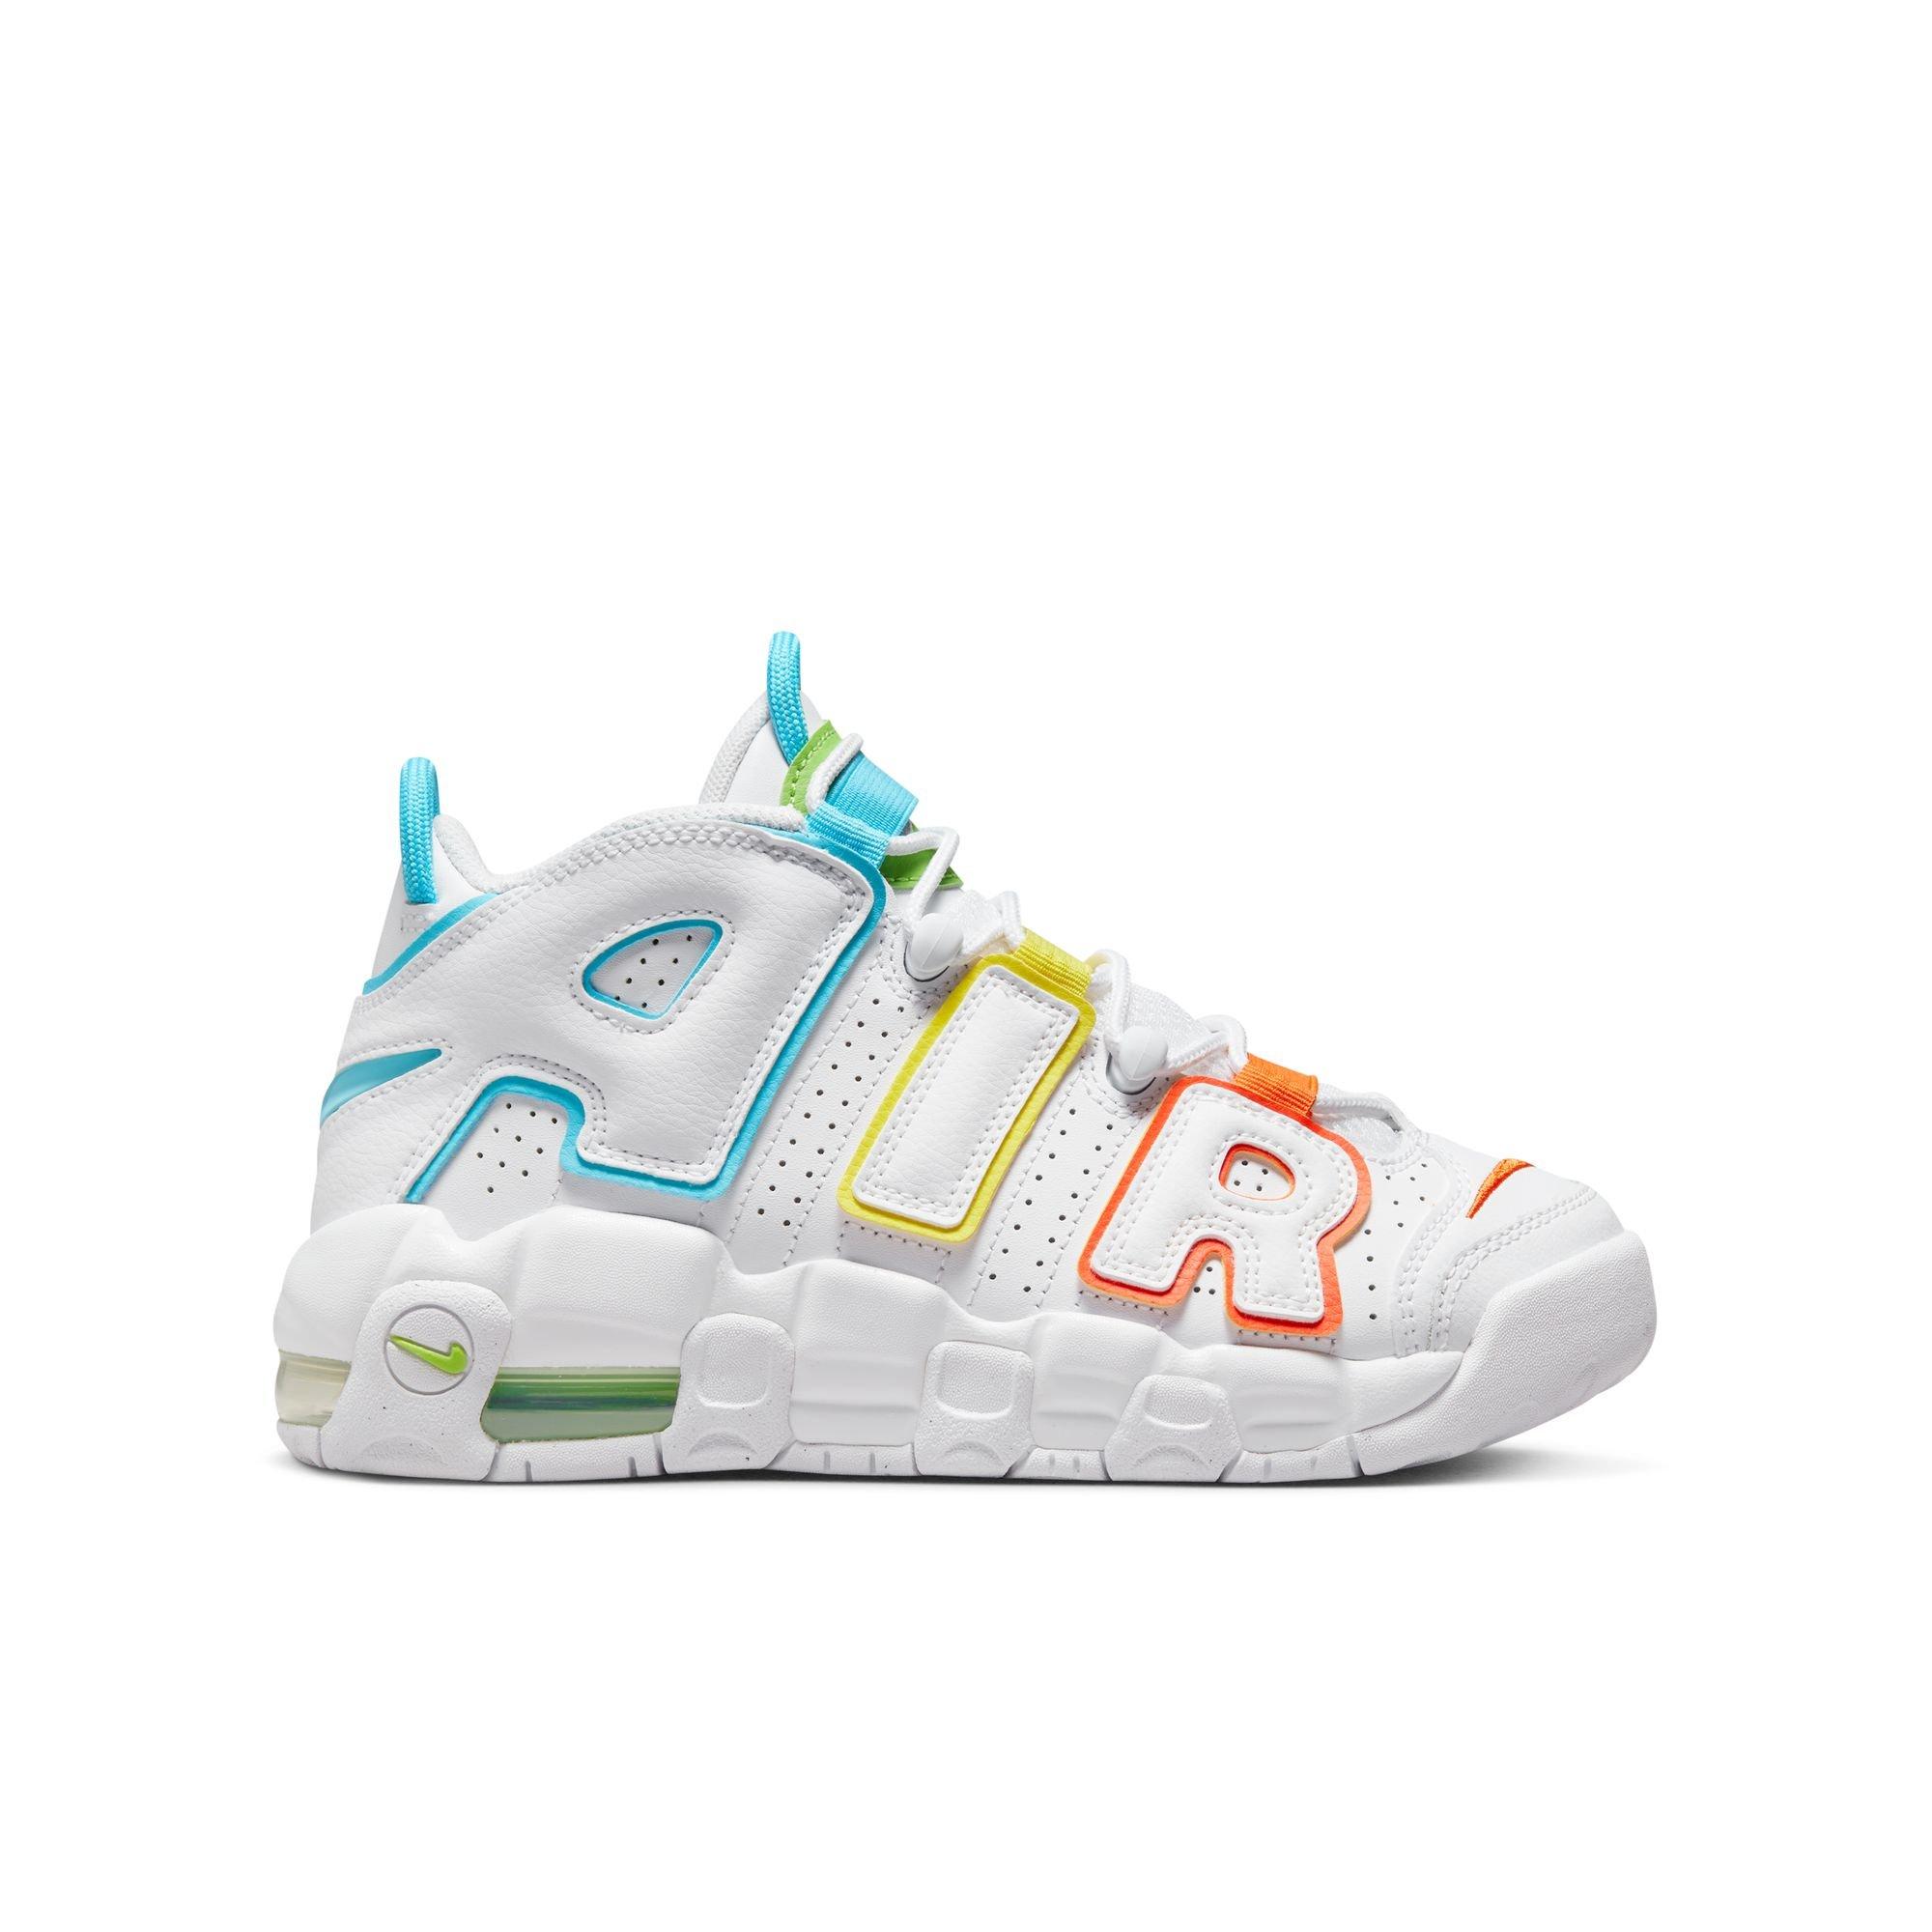 Nike Air More Uptempo 'White on White' Release Date. Nike SNKRS LU